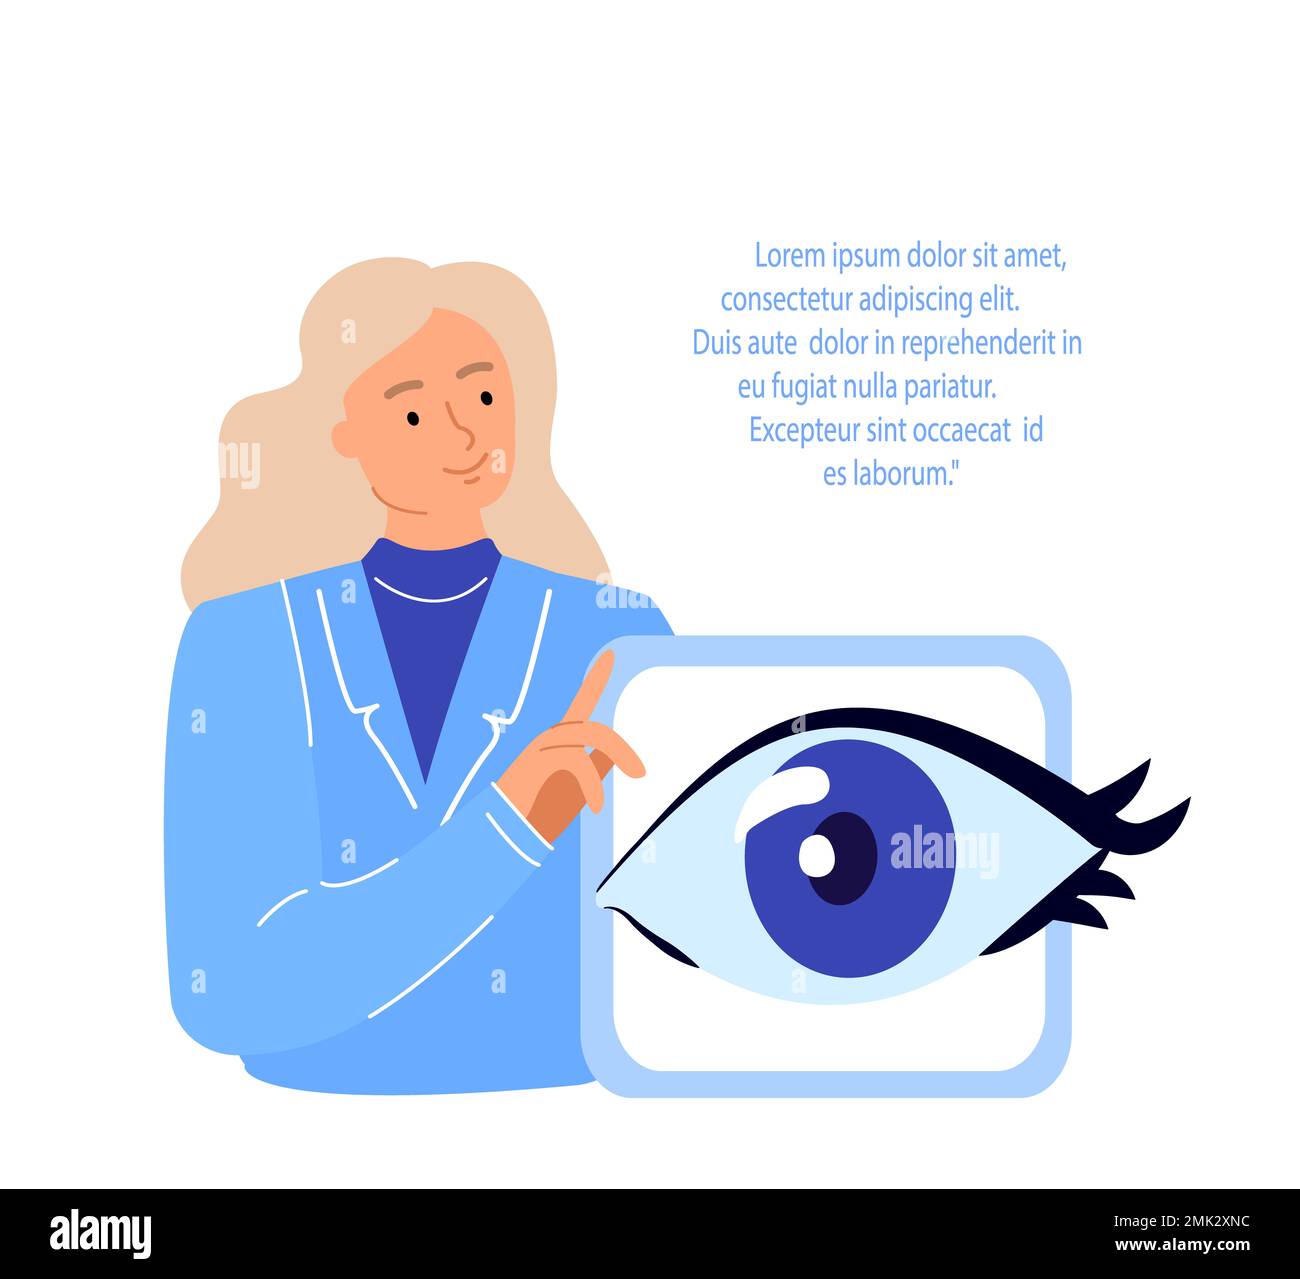 Doctors Ophthalmologist, Oculists Examine, Diagnose Eye Vision Acuity with Snellen Chart.Farsightedness,Color Blindness, Glaucoma Treatment.Research C Stock Photo